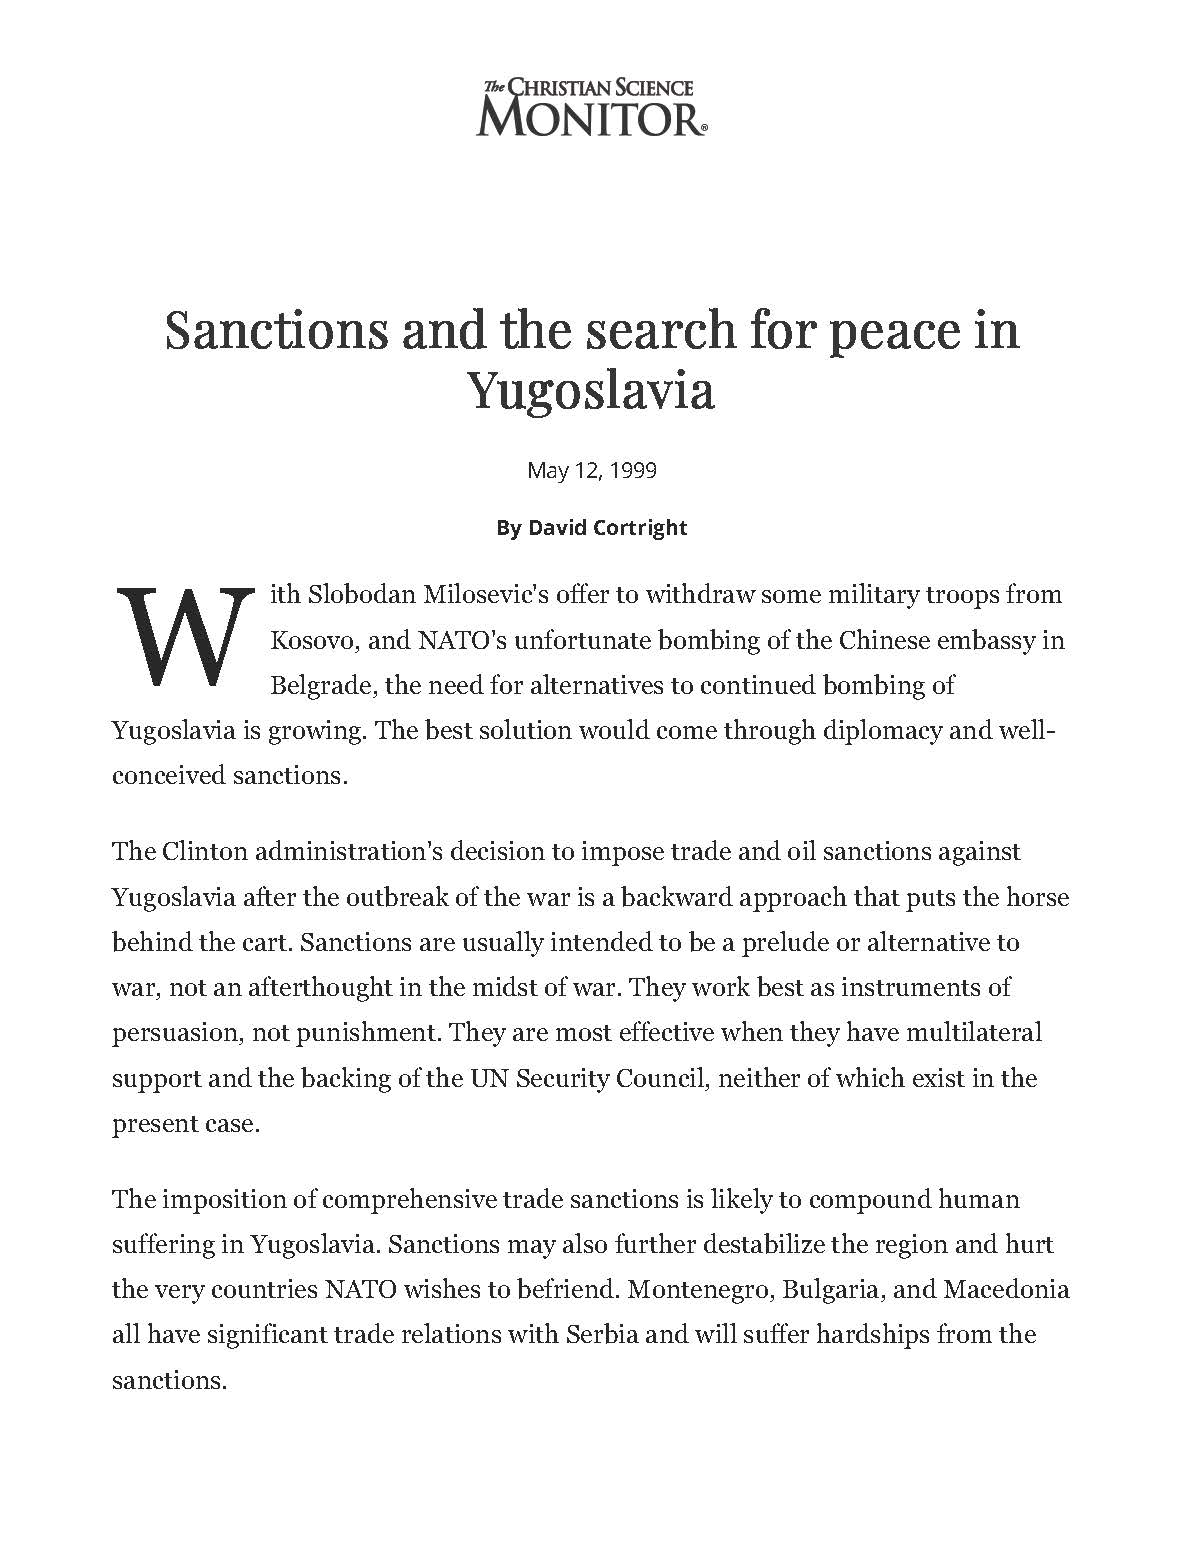 Sanctions and the Search for Peace in Yugoslavia